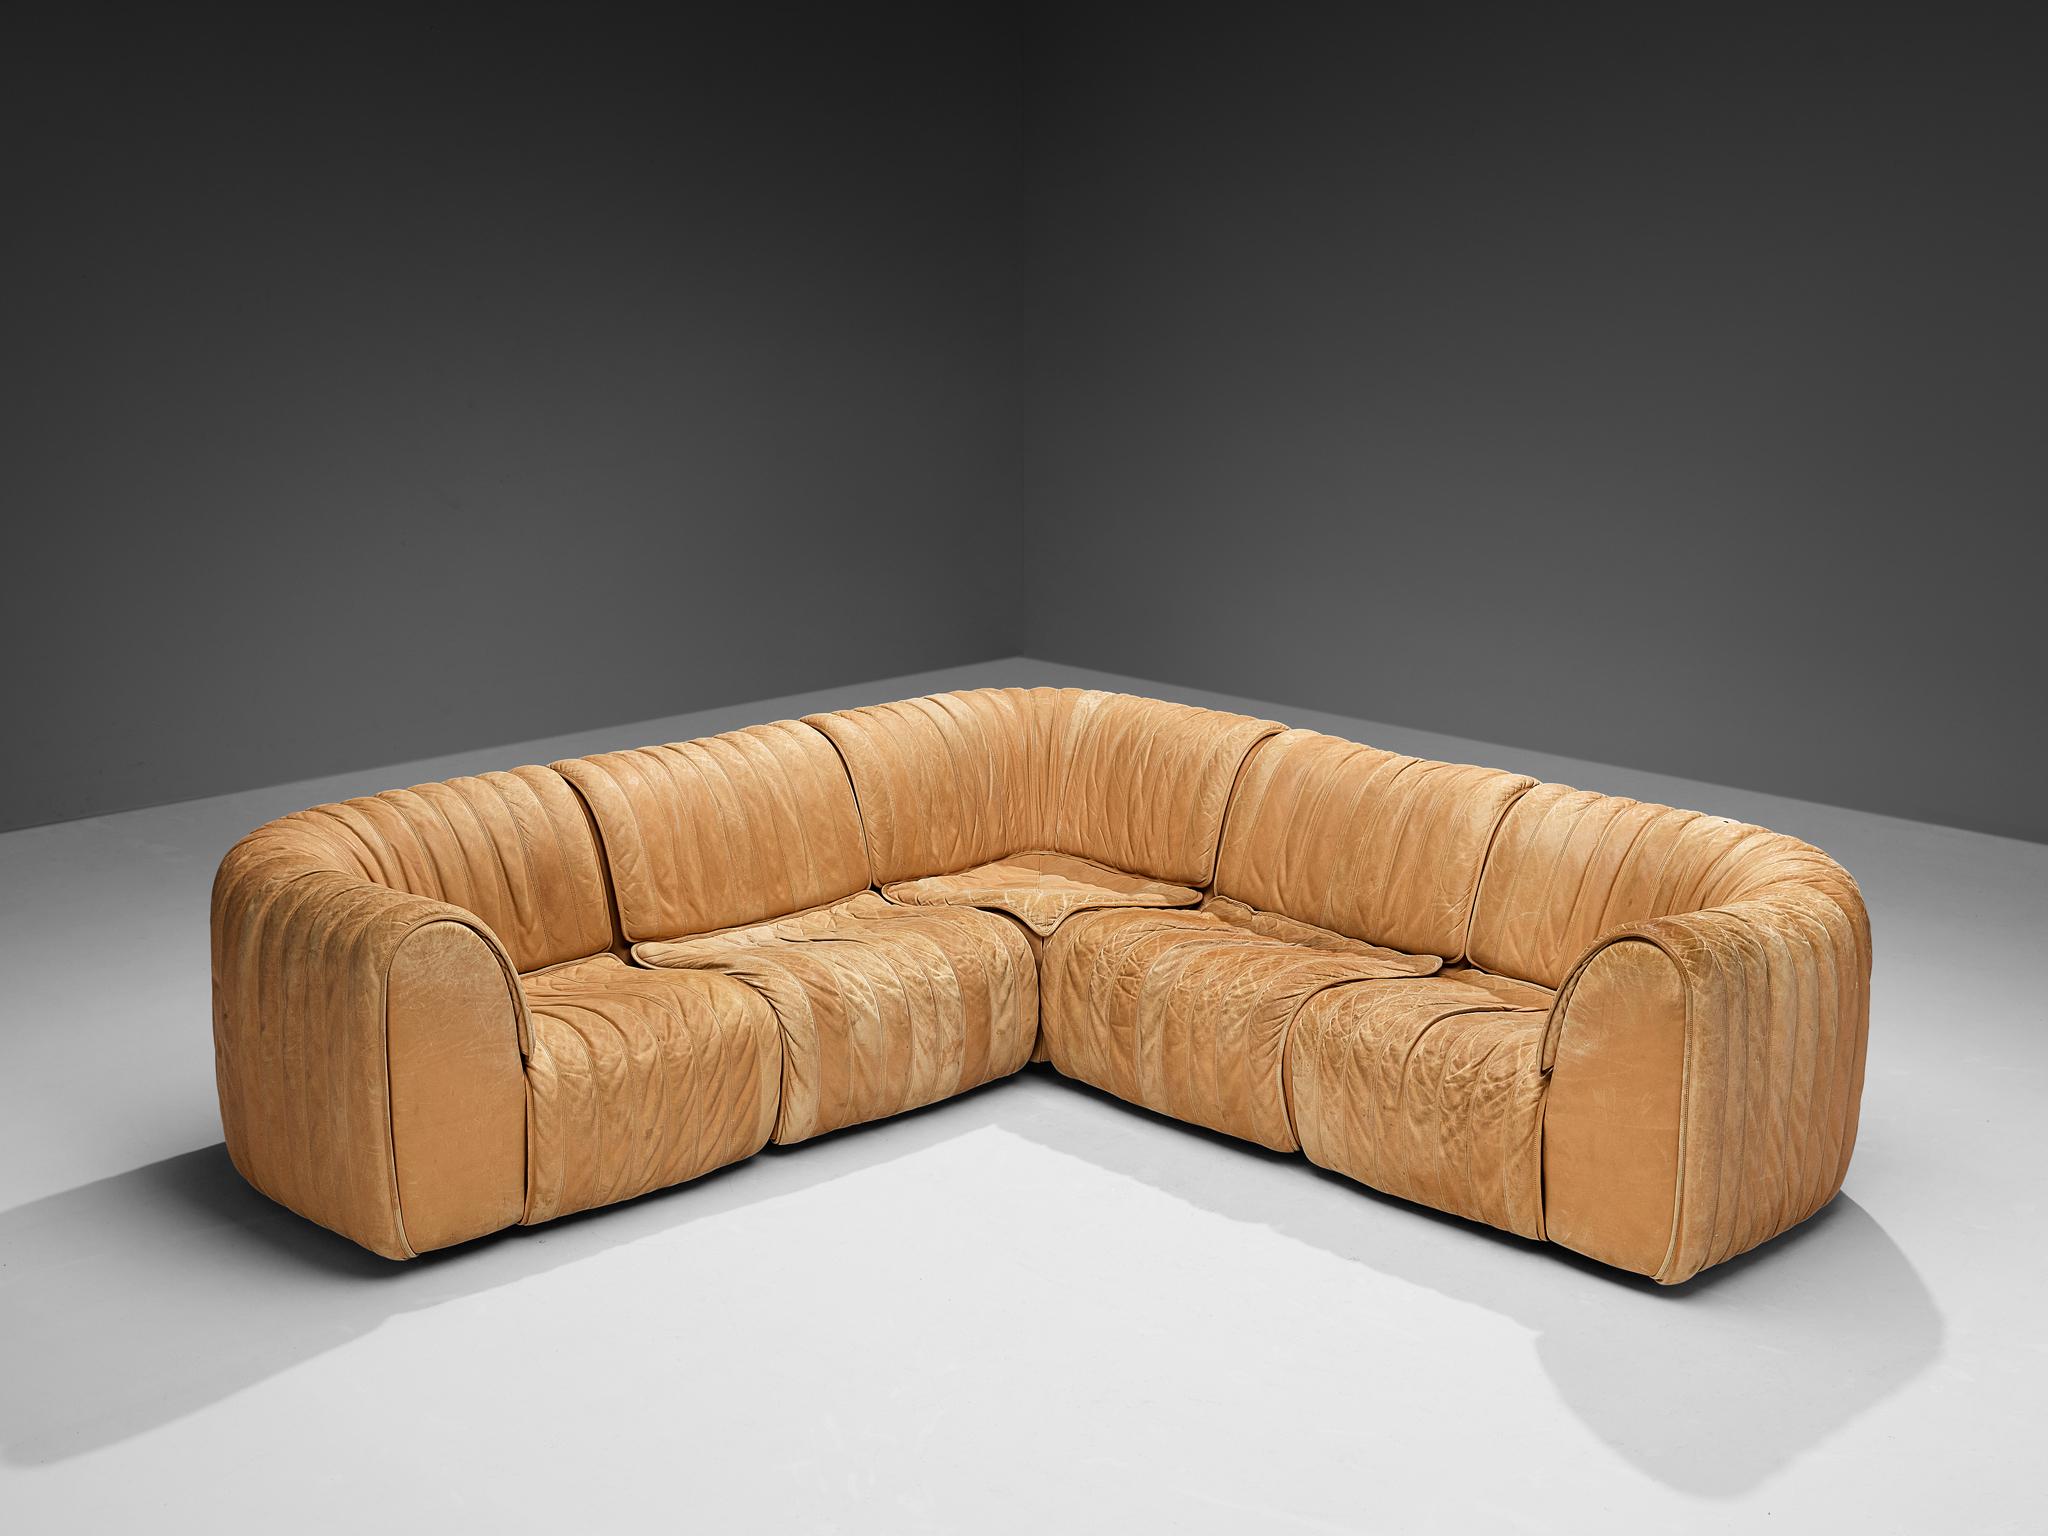 De Sede, ‘DS-22’ Modular sofa, leather, Switzerland, 1980s 

This high quality sectional sofa designed by De Sede in the 1980s contains three corner element and three regular elements. Therefore, the sofa becomes very versatile as it allows you to